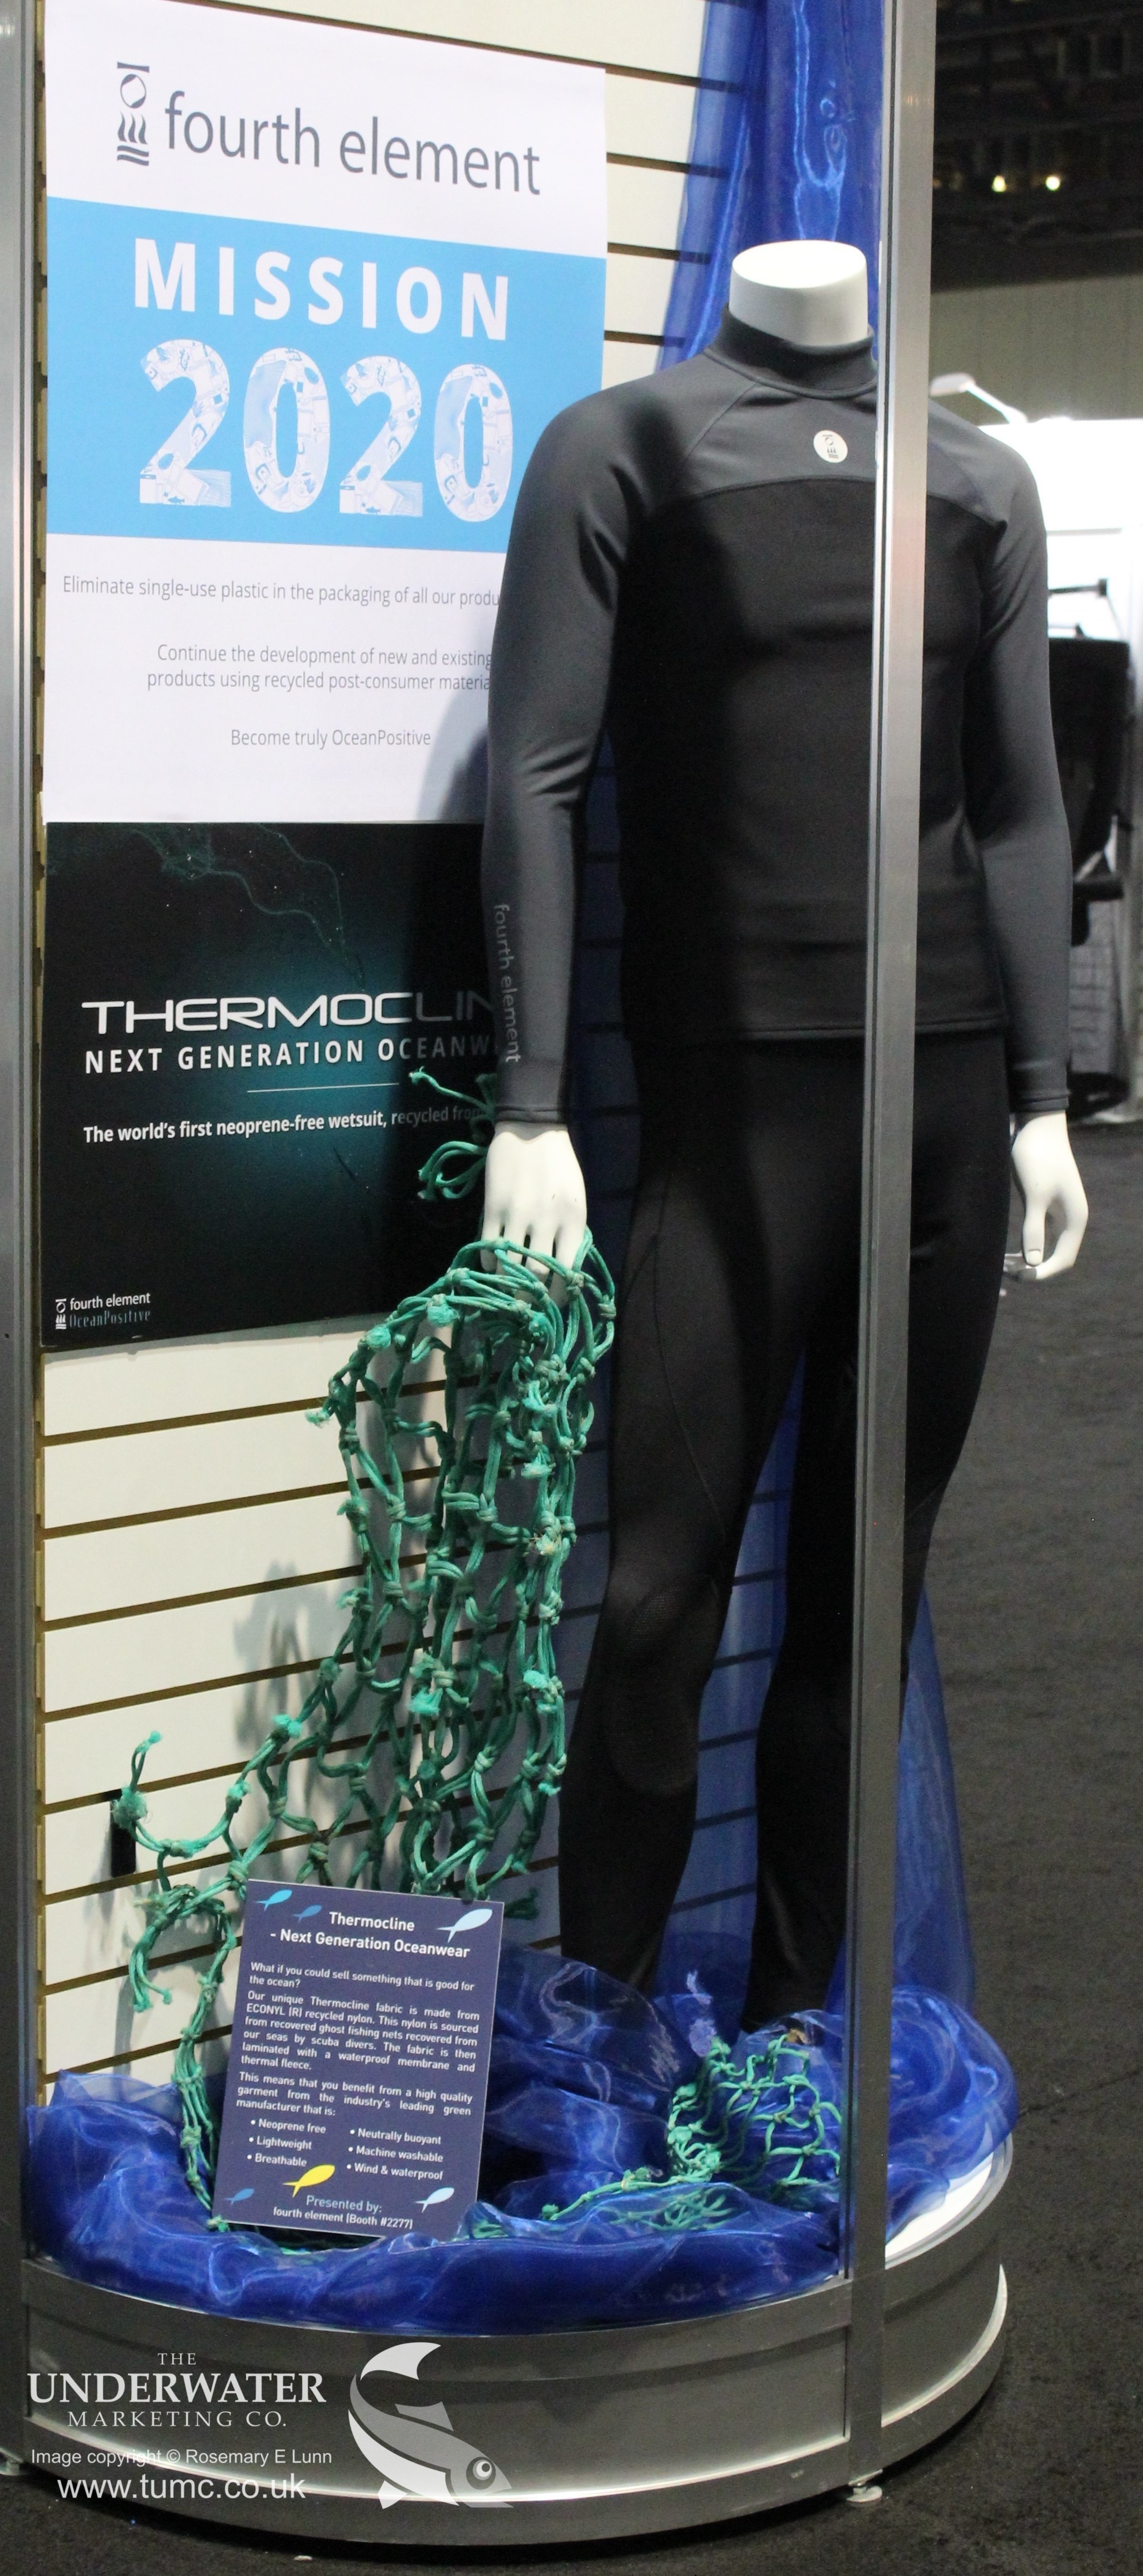 Fourth Element, Thermocline,, ECONYL® Recycled Nylon, Ghost Fishing, Rosemary E Lunn, Roz Lunn, Deeperblue, Jim Standing, DEMA Show 2017, neoprene free wetsuit, Mission 2020